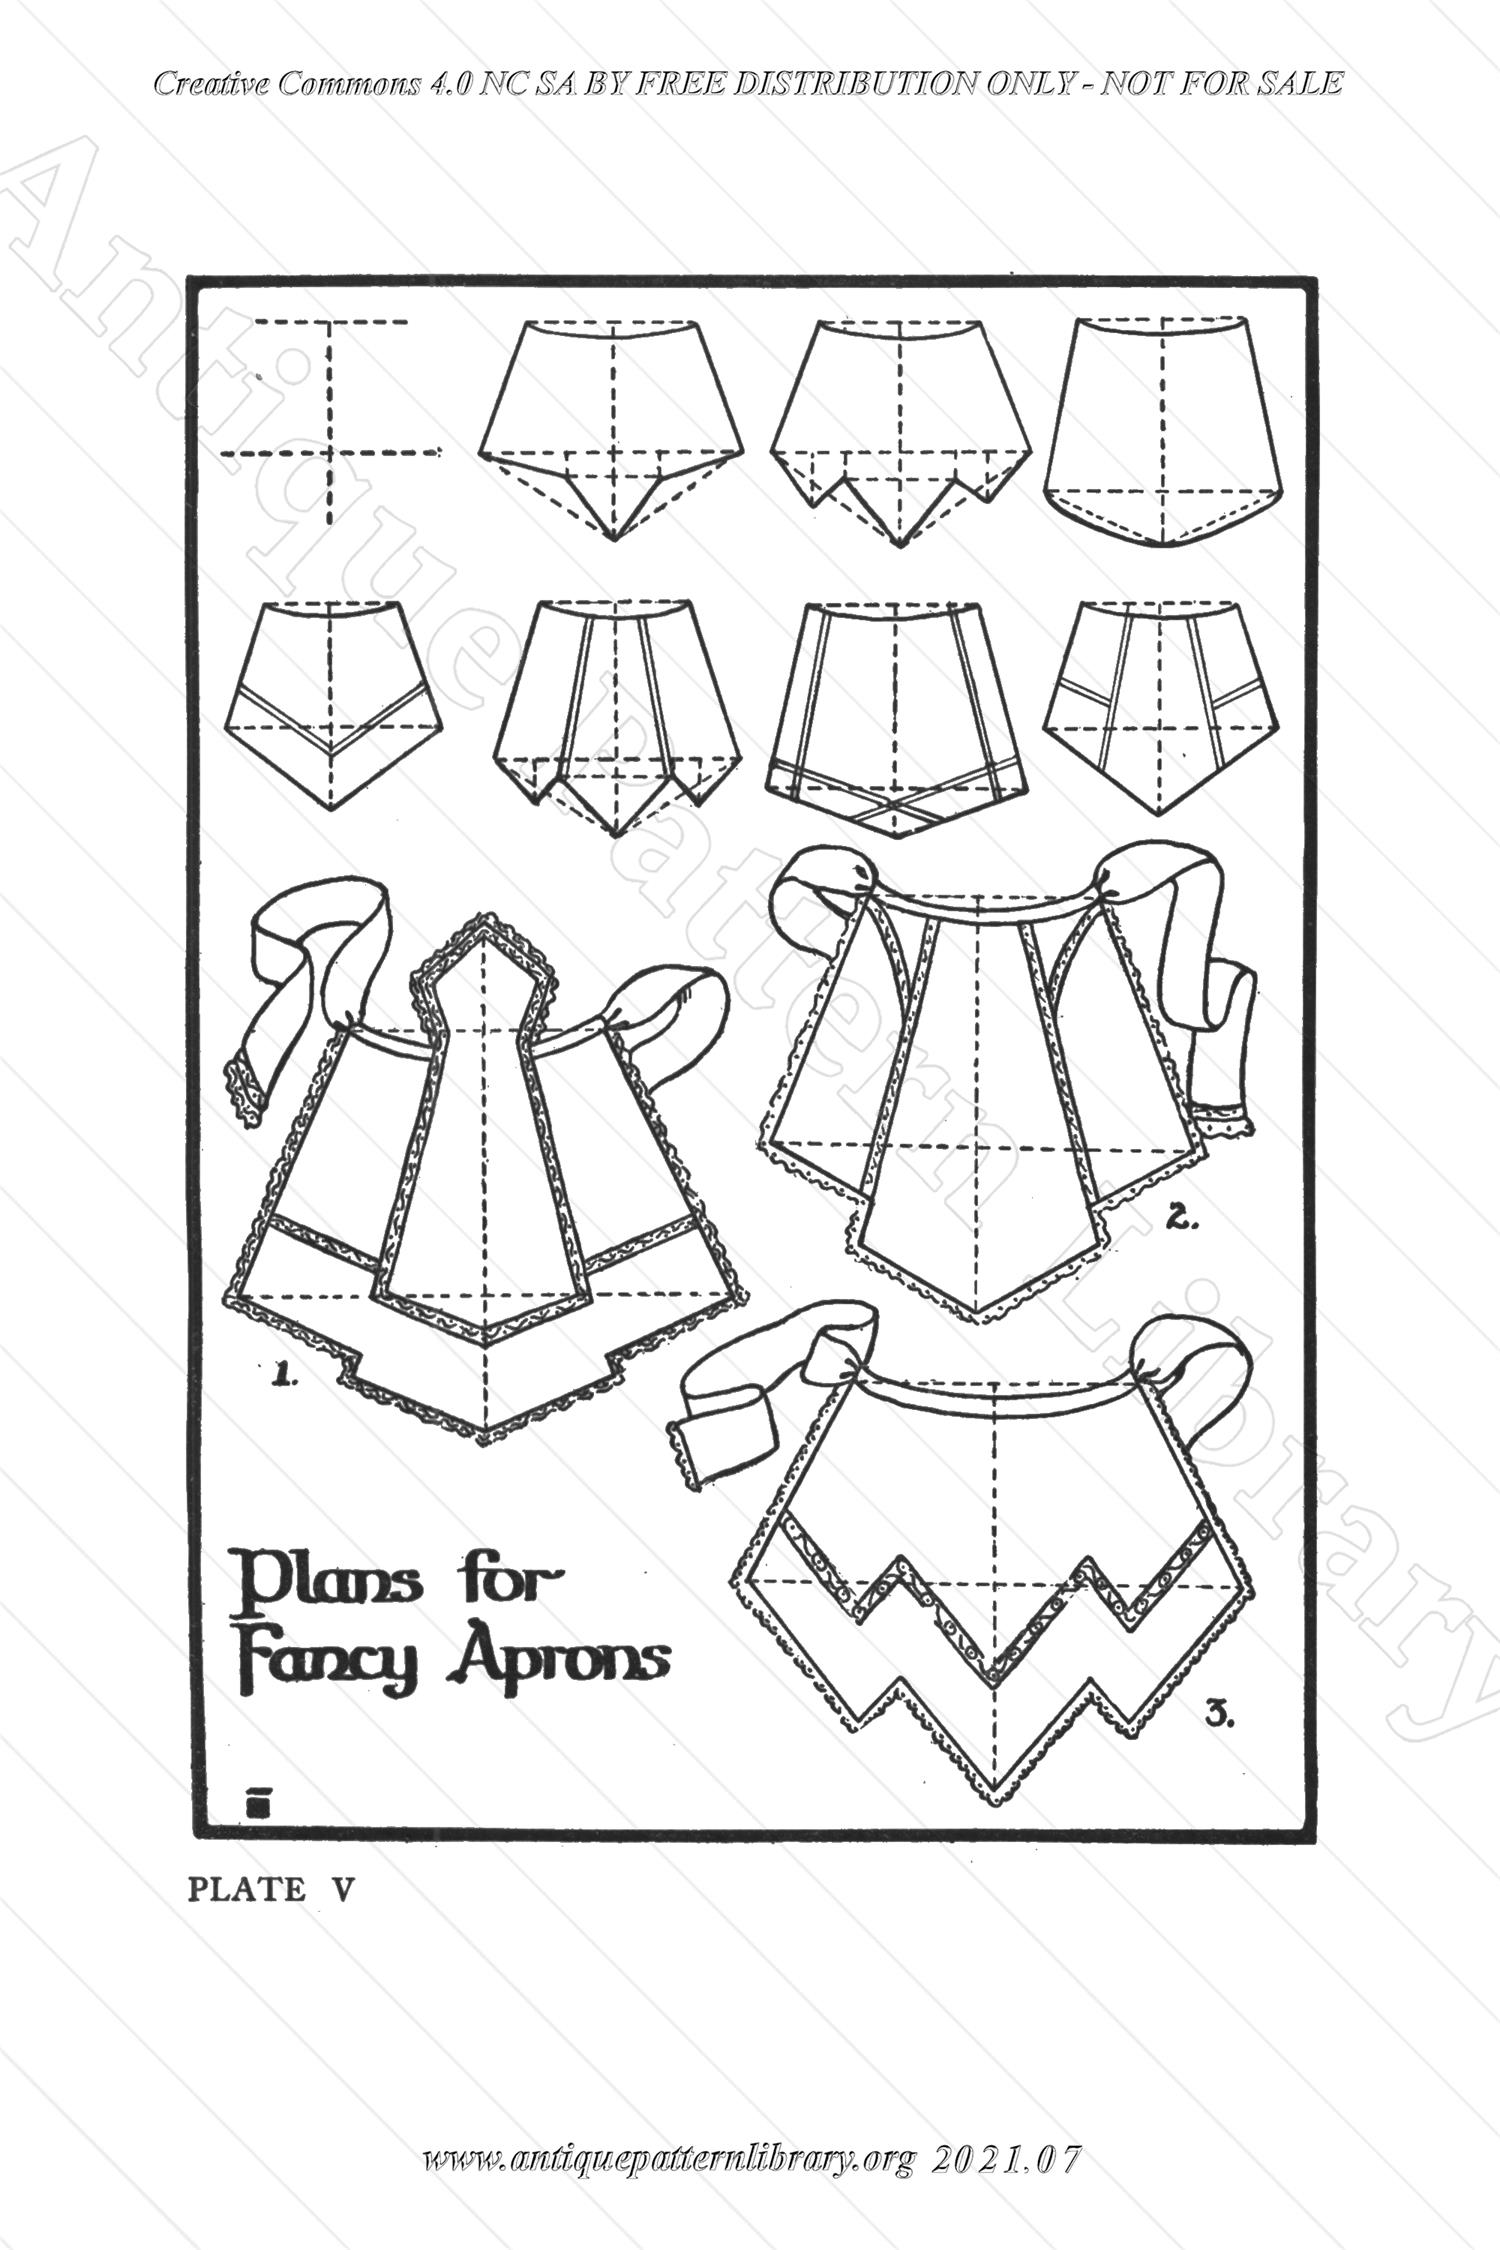 D-YS035 Costume Design and Home Planning